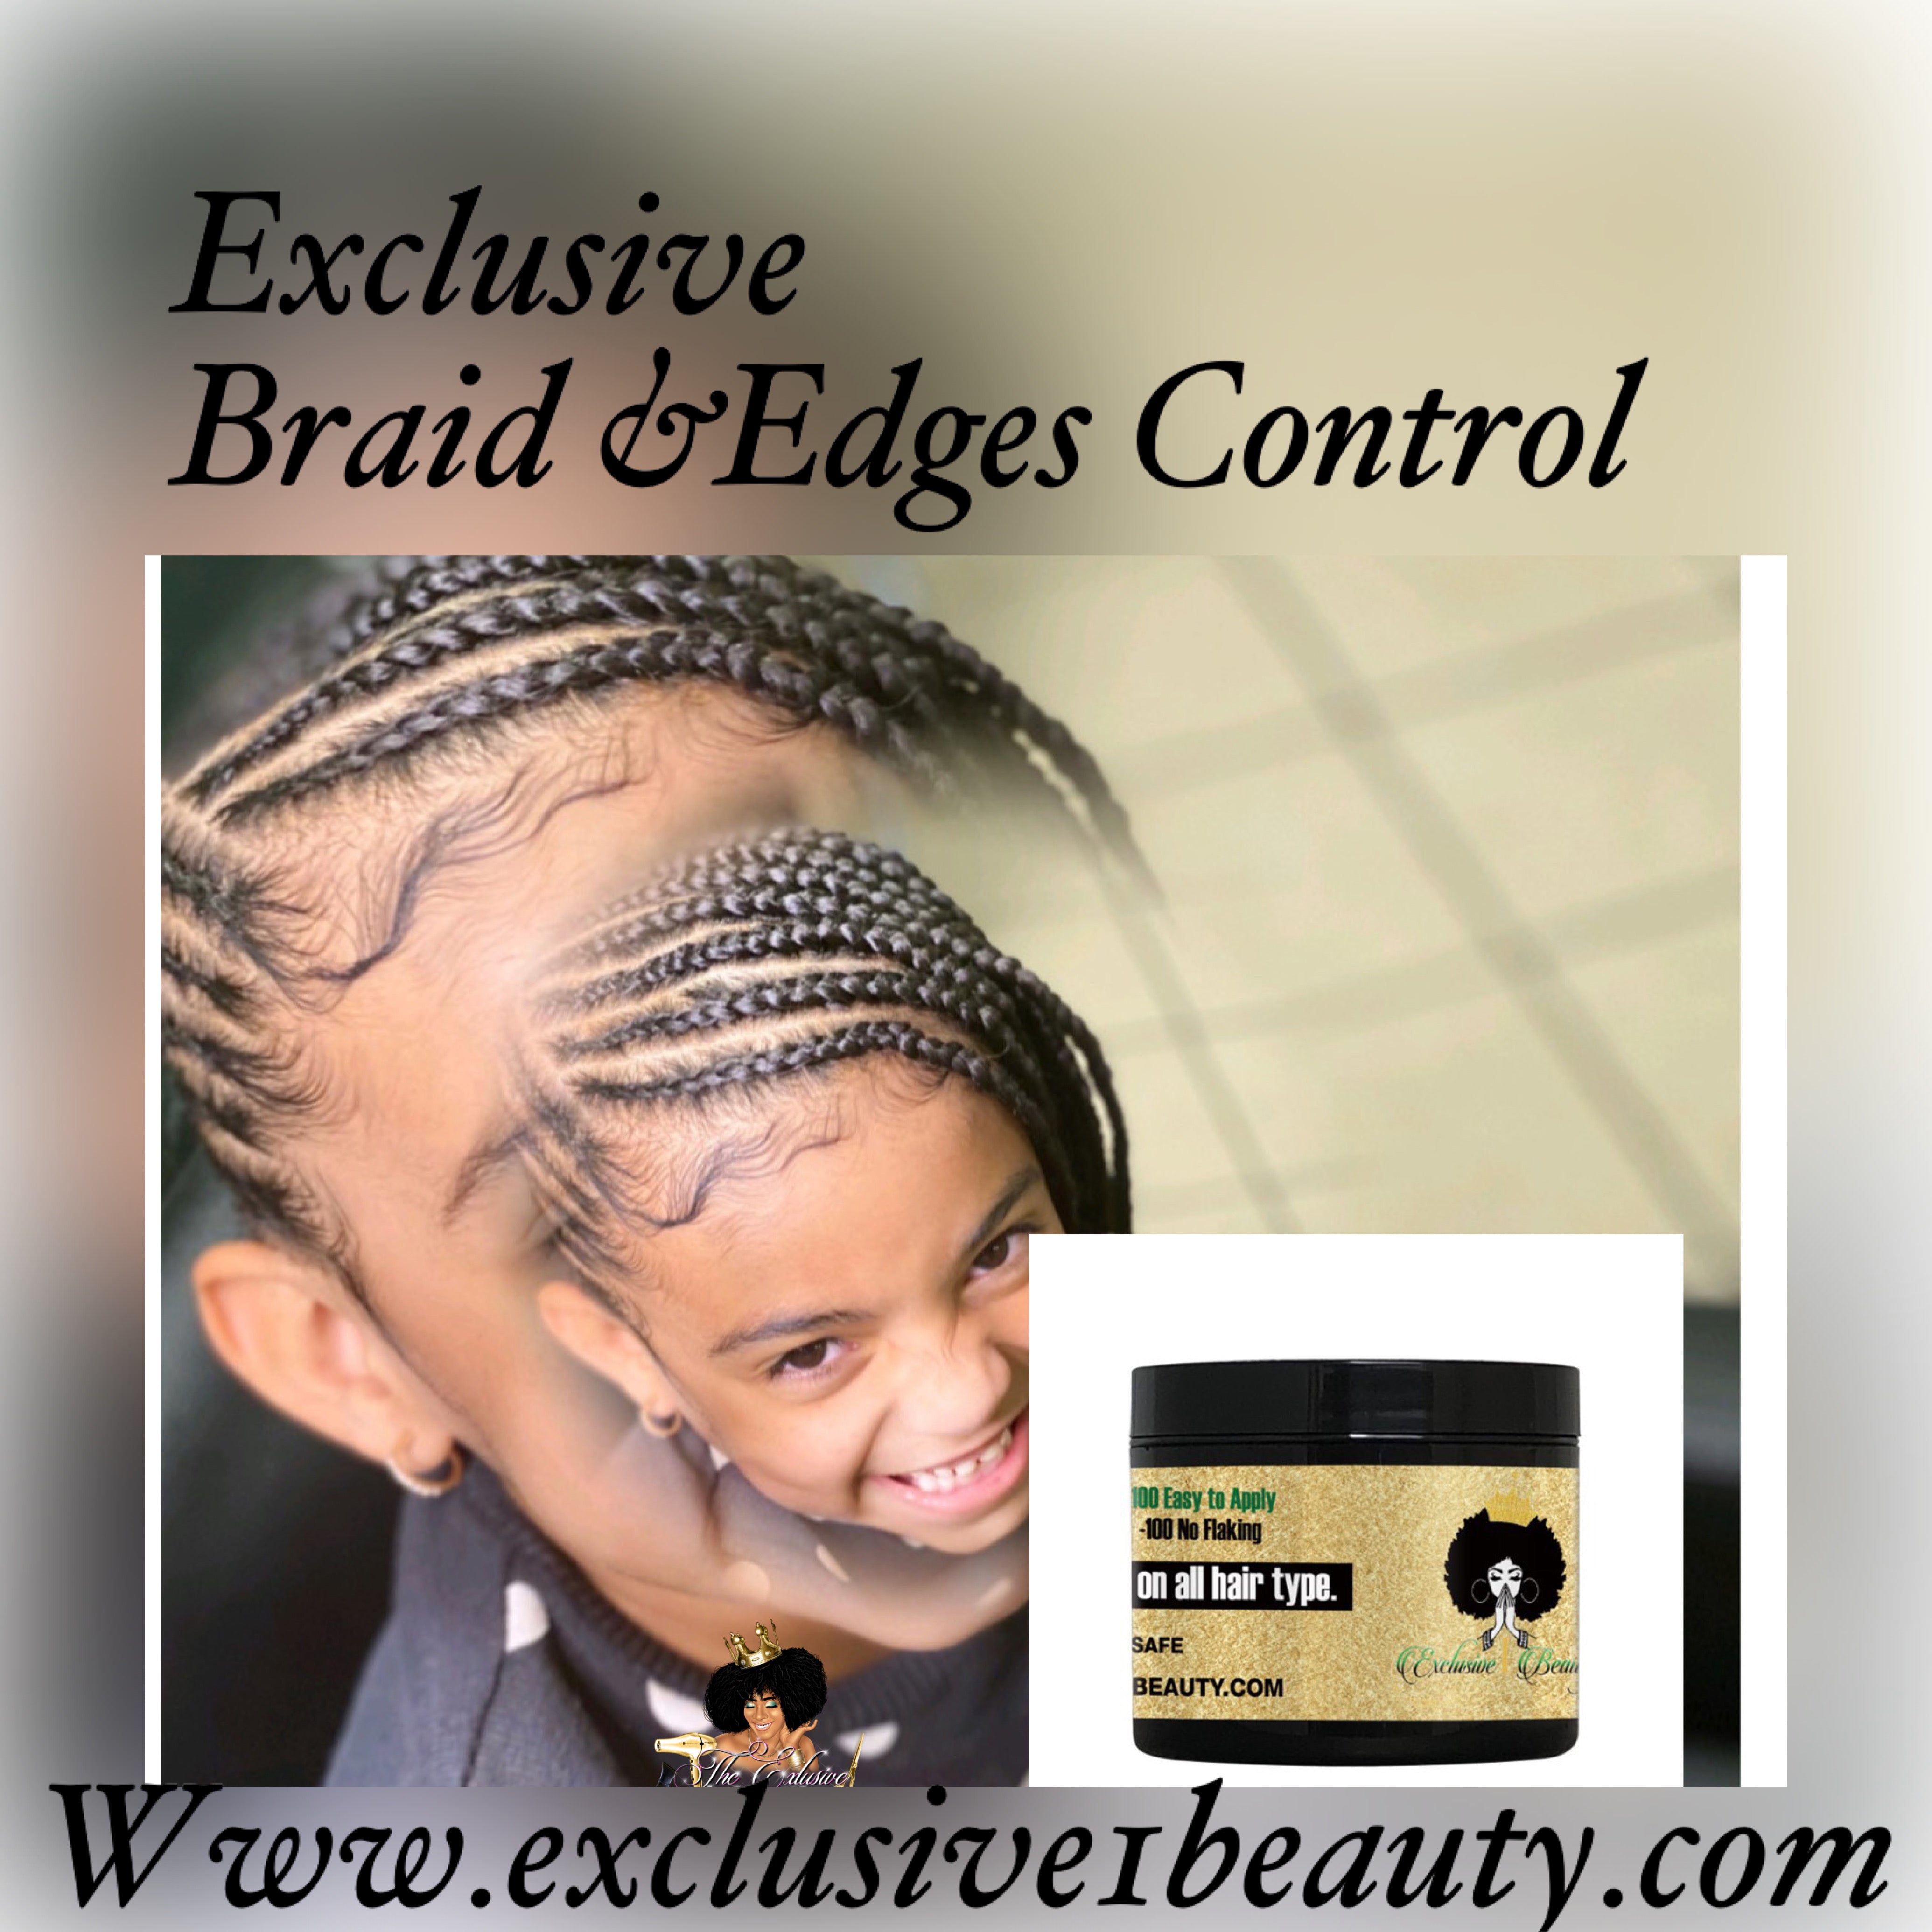 Edges Control 48hr hold 100% Quick Dry 100% NON STICKY 100%NO FLAKING WORK WONDERS ON ALL HAIRTYPE.4oz